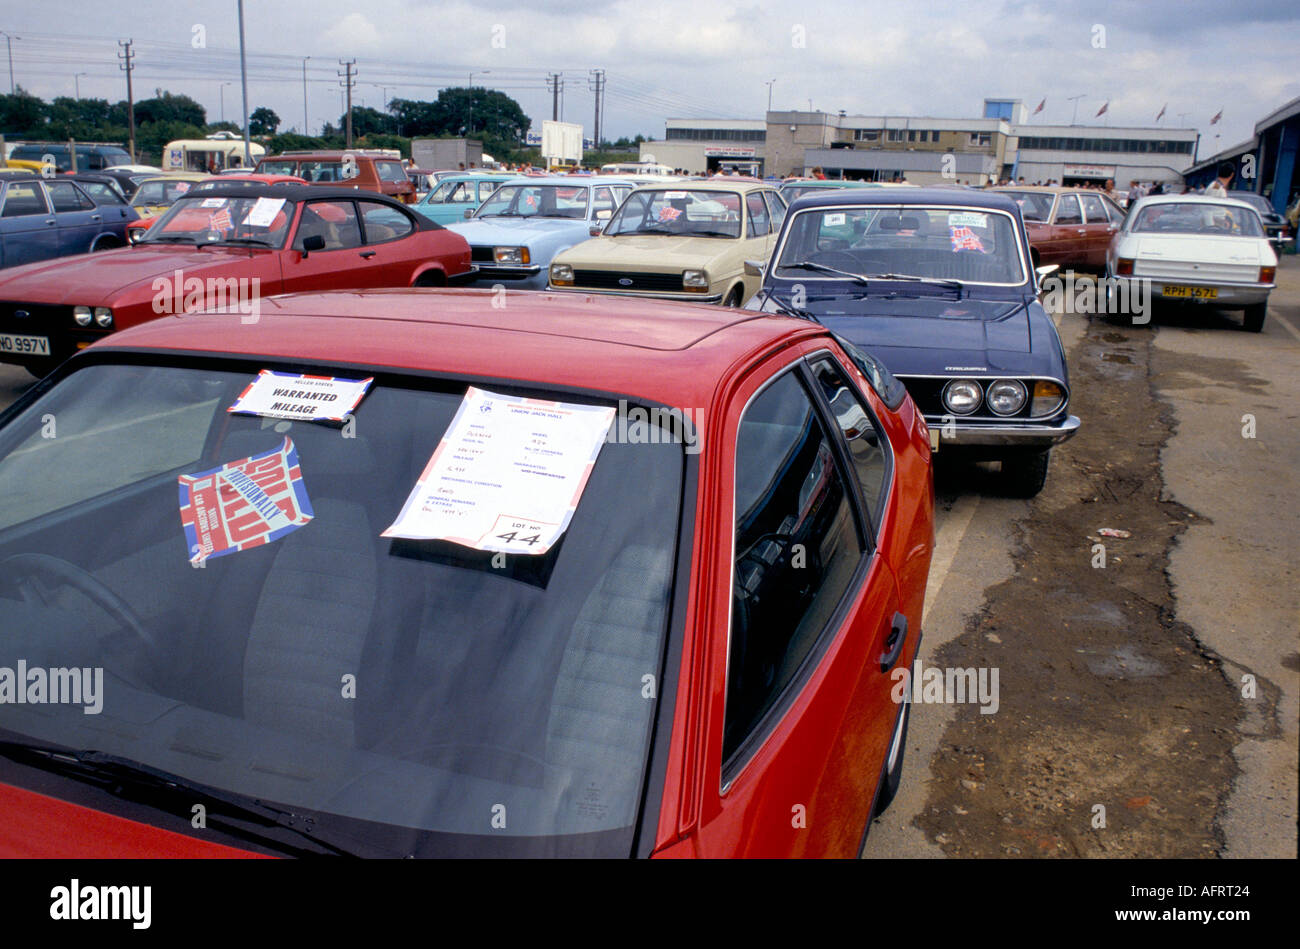 British Car Auctions cars prices and details on wind screen that will be auctioned. Wandsworth Bridge Road, Fulham, London 1981 1980s UK HOMER SYKES Stock Photo